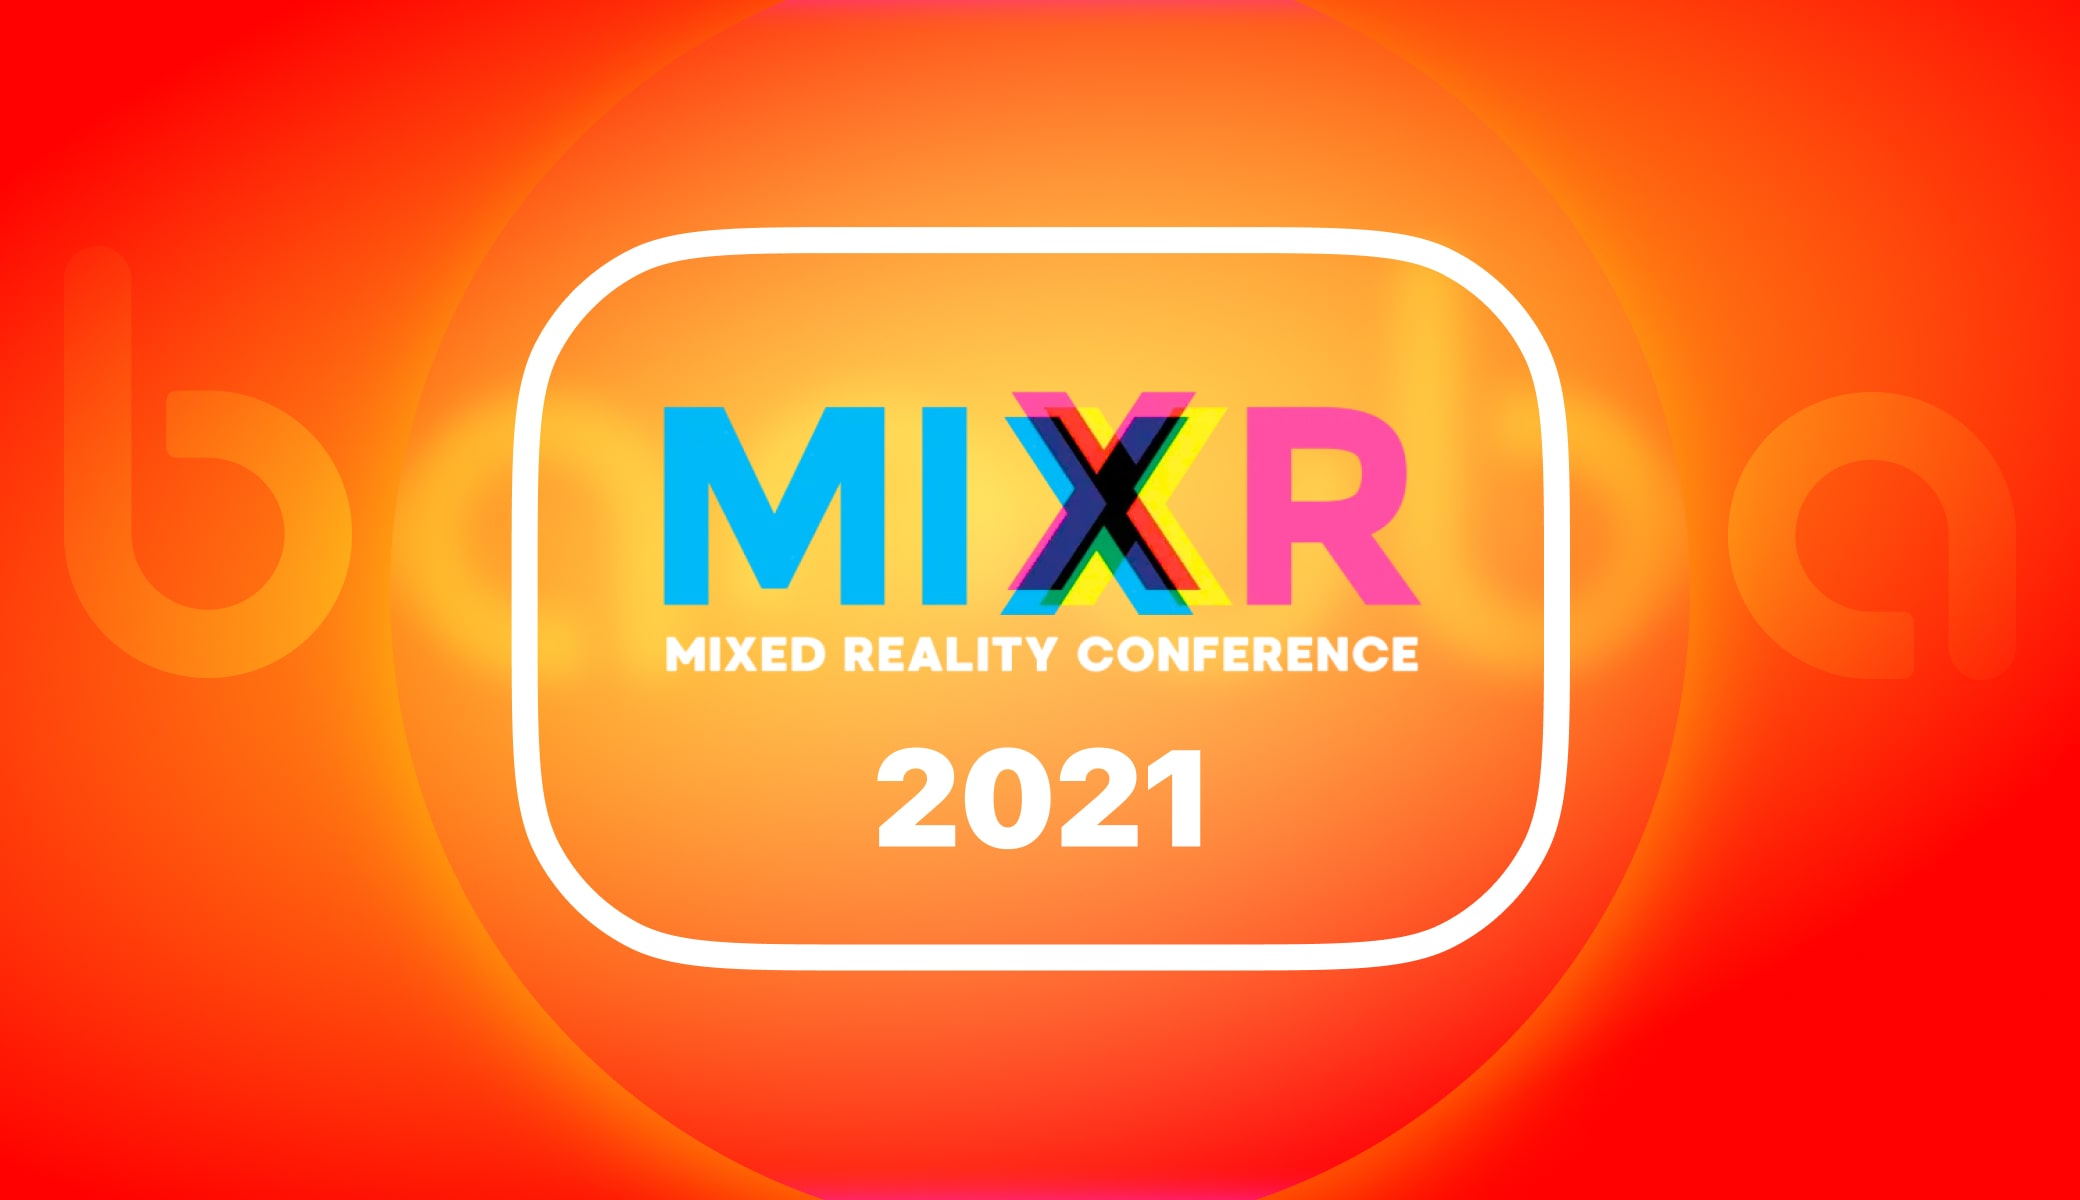 Mixed Reality Conference (MIXR) 